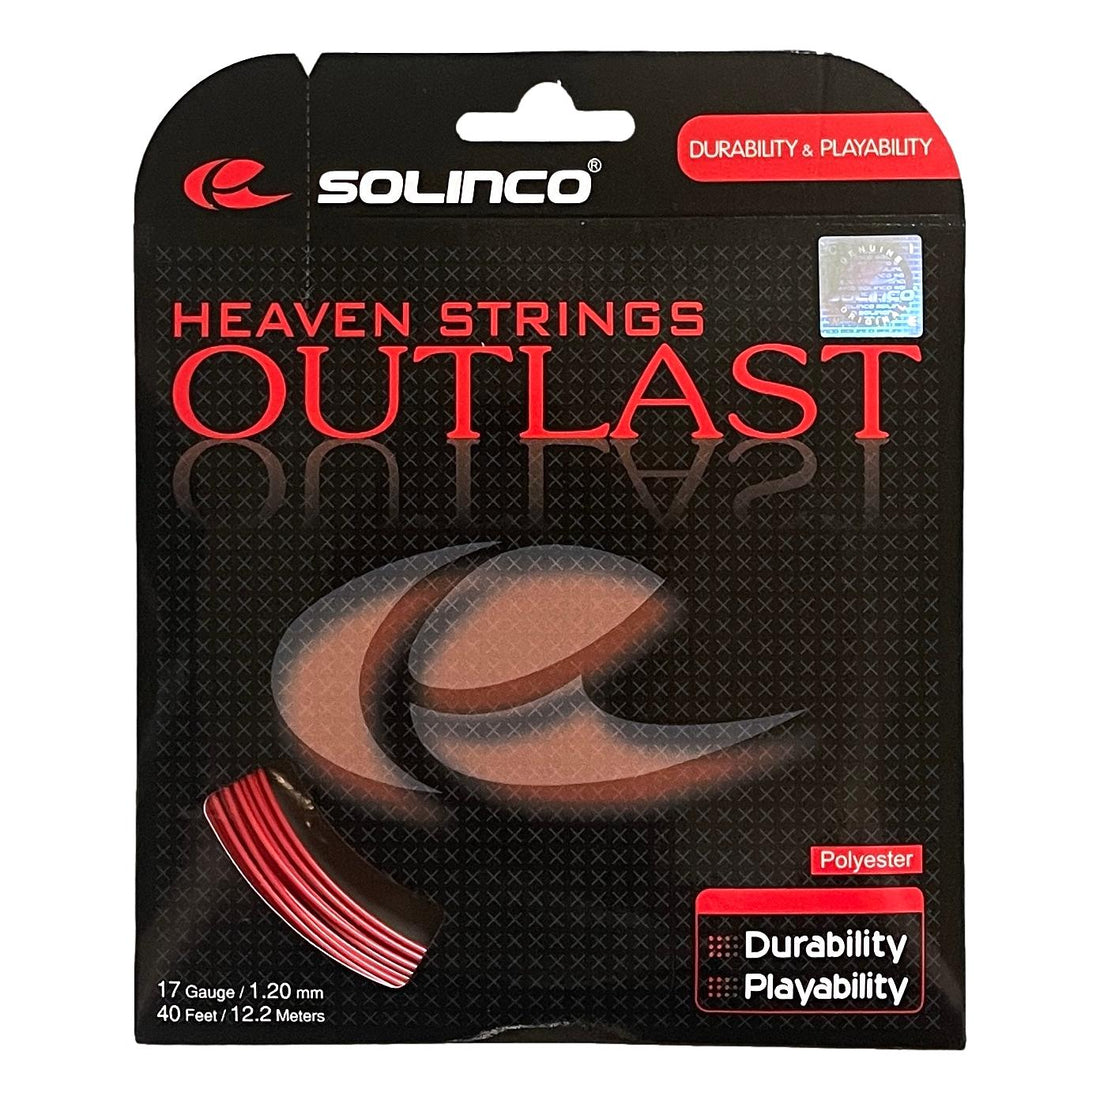 Solinco Outlast 17 Tennis String - Durable Co-Polyester for Maximum Playability